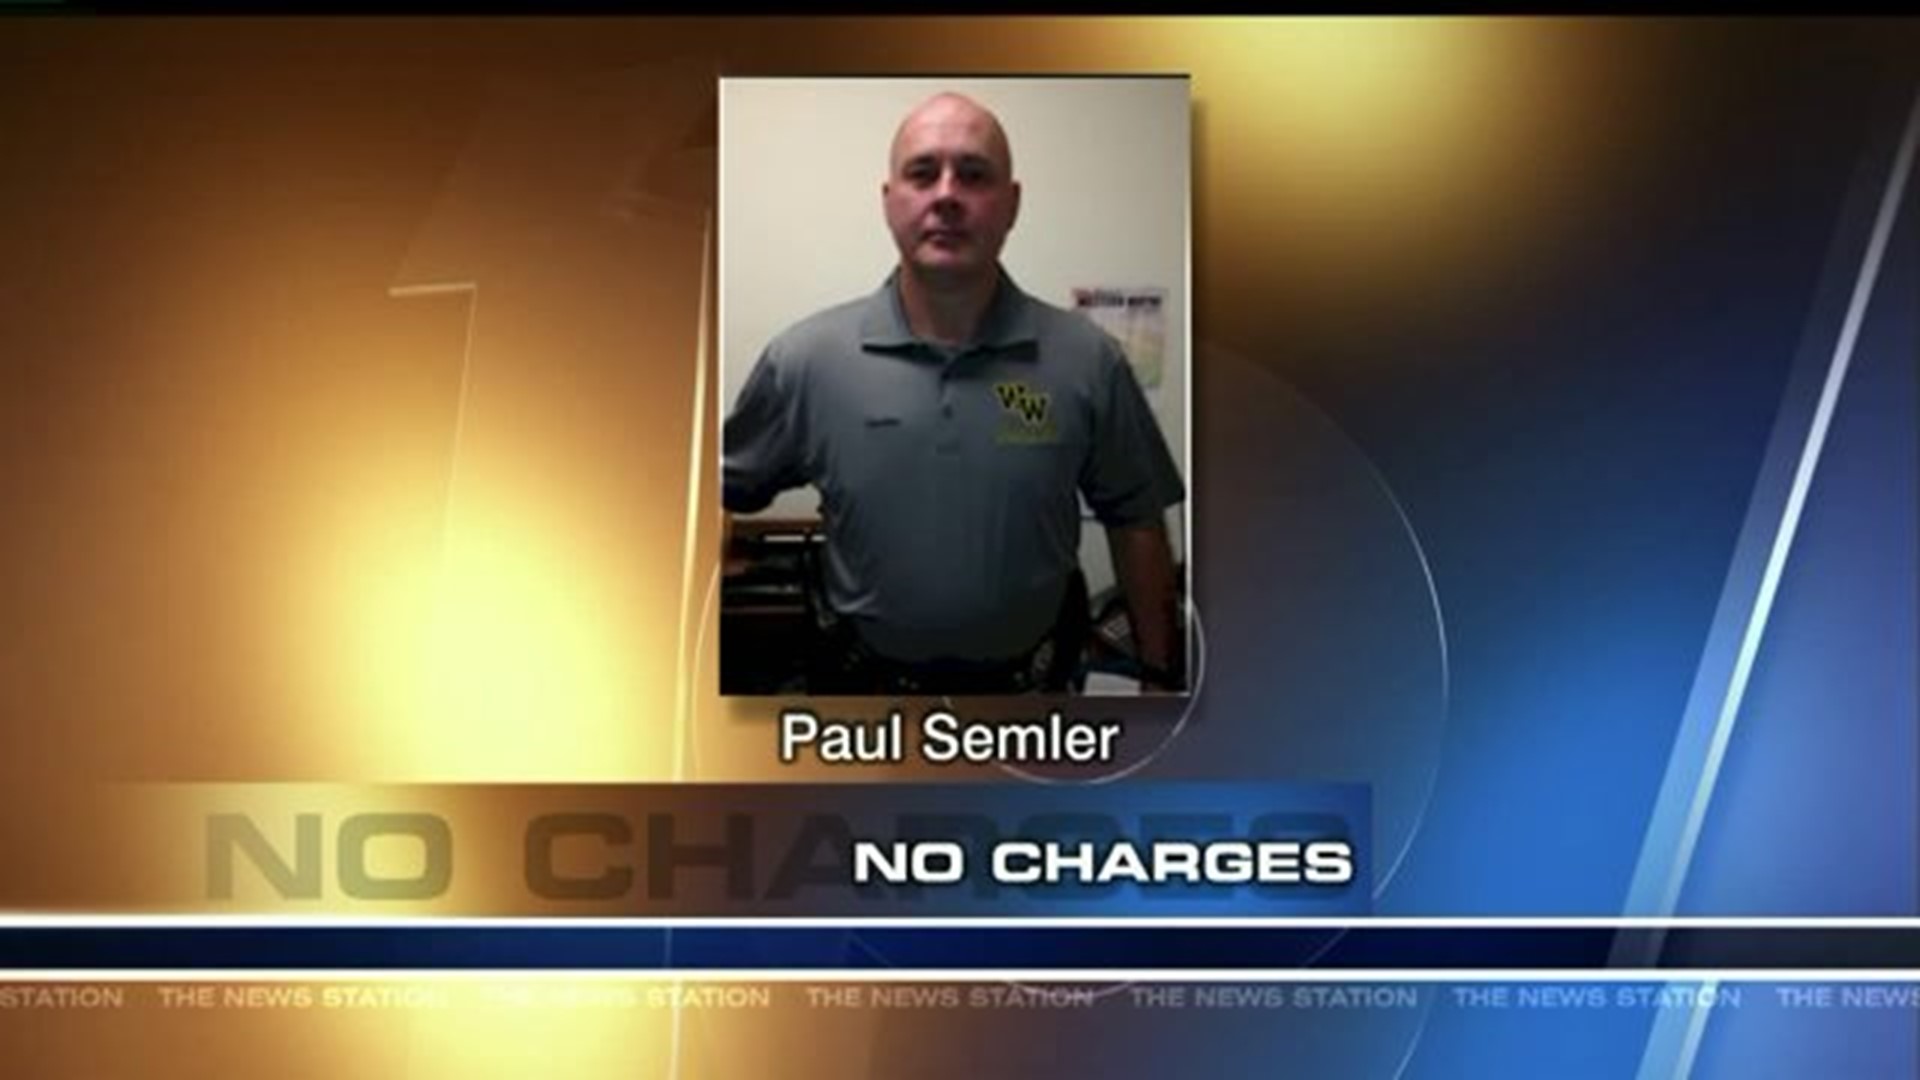 No Charges Against School Officer